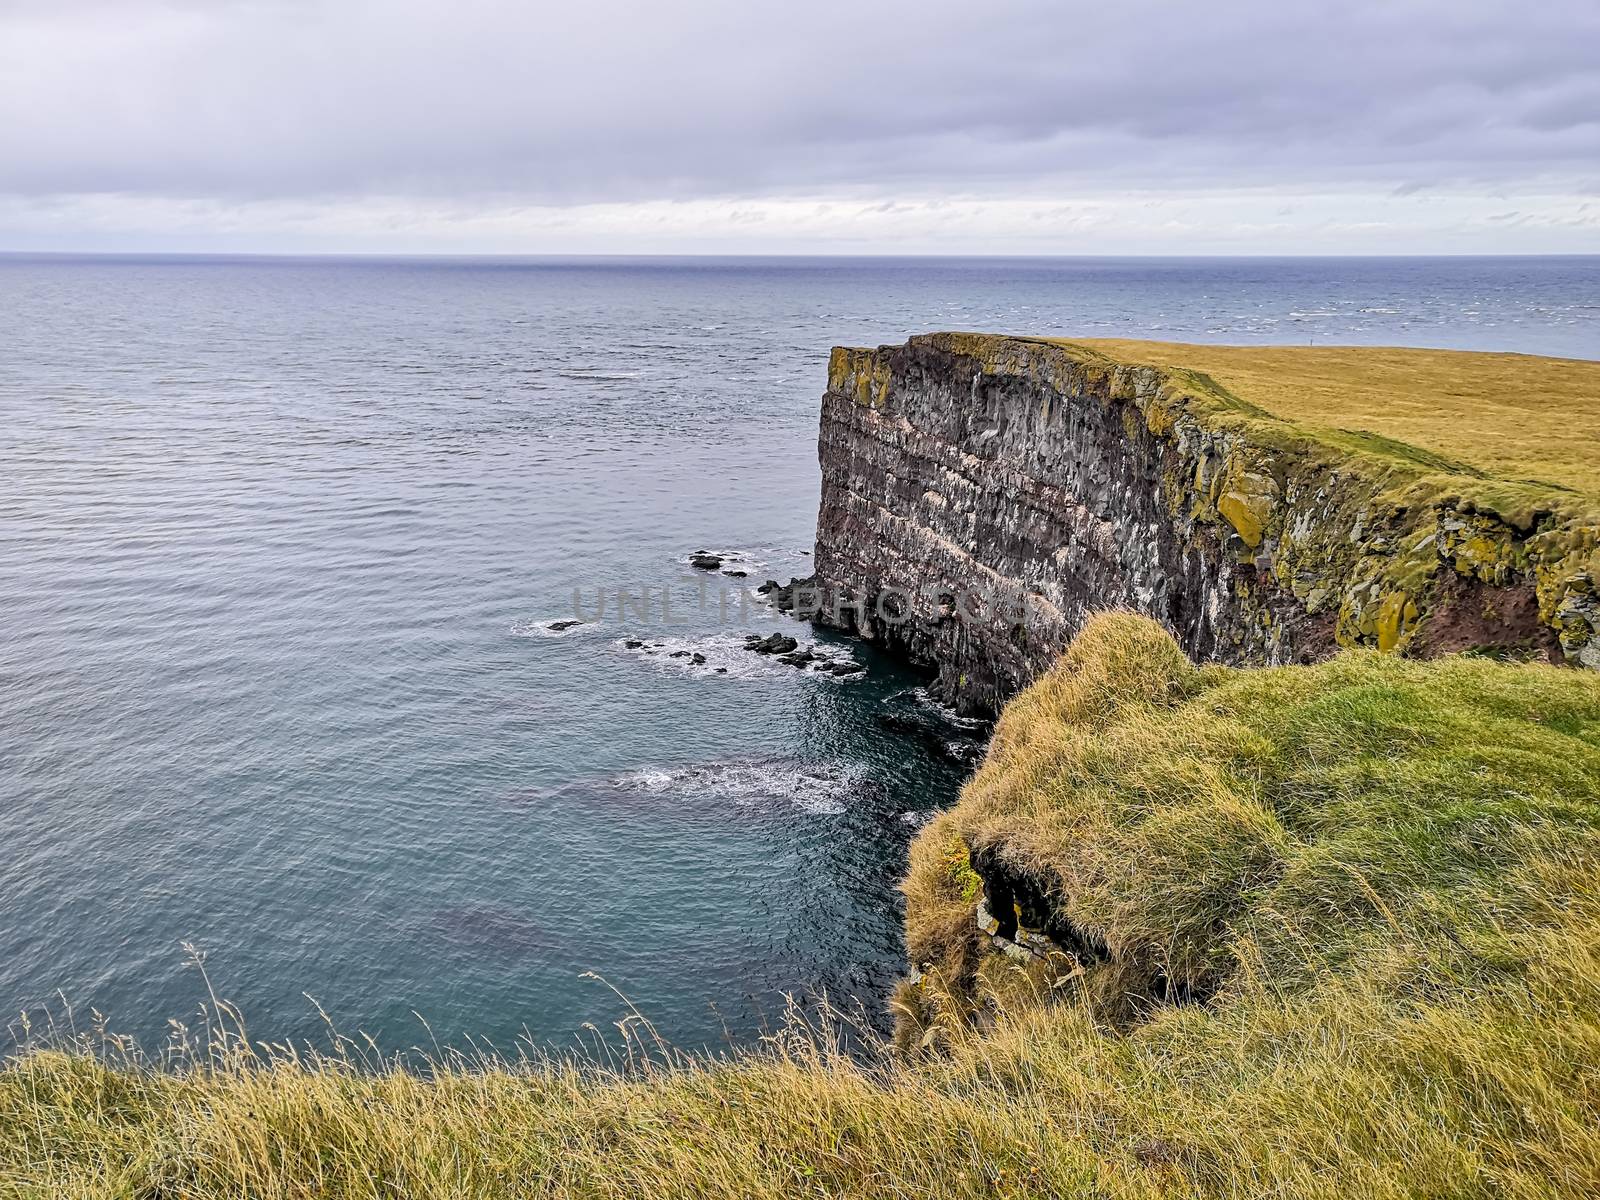 Latrabjarg in Iceland cliff coast an nesting place of millions of Atlantic puffins during autumn